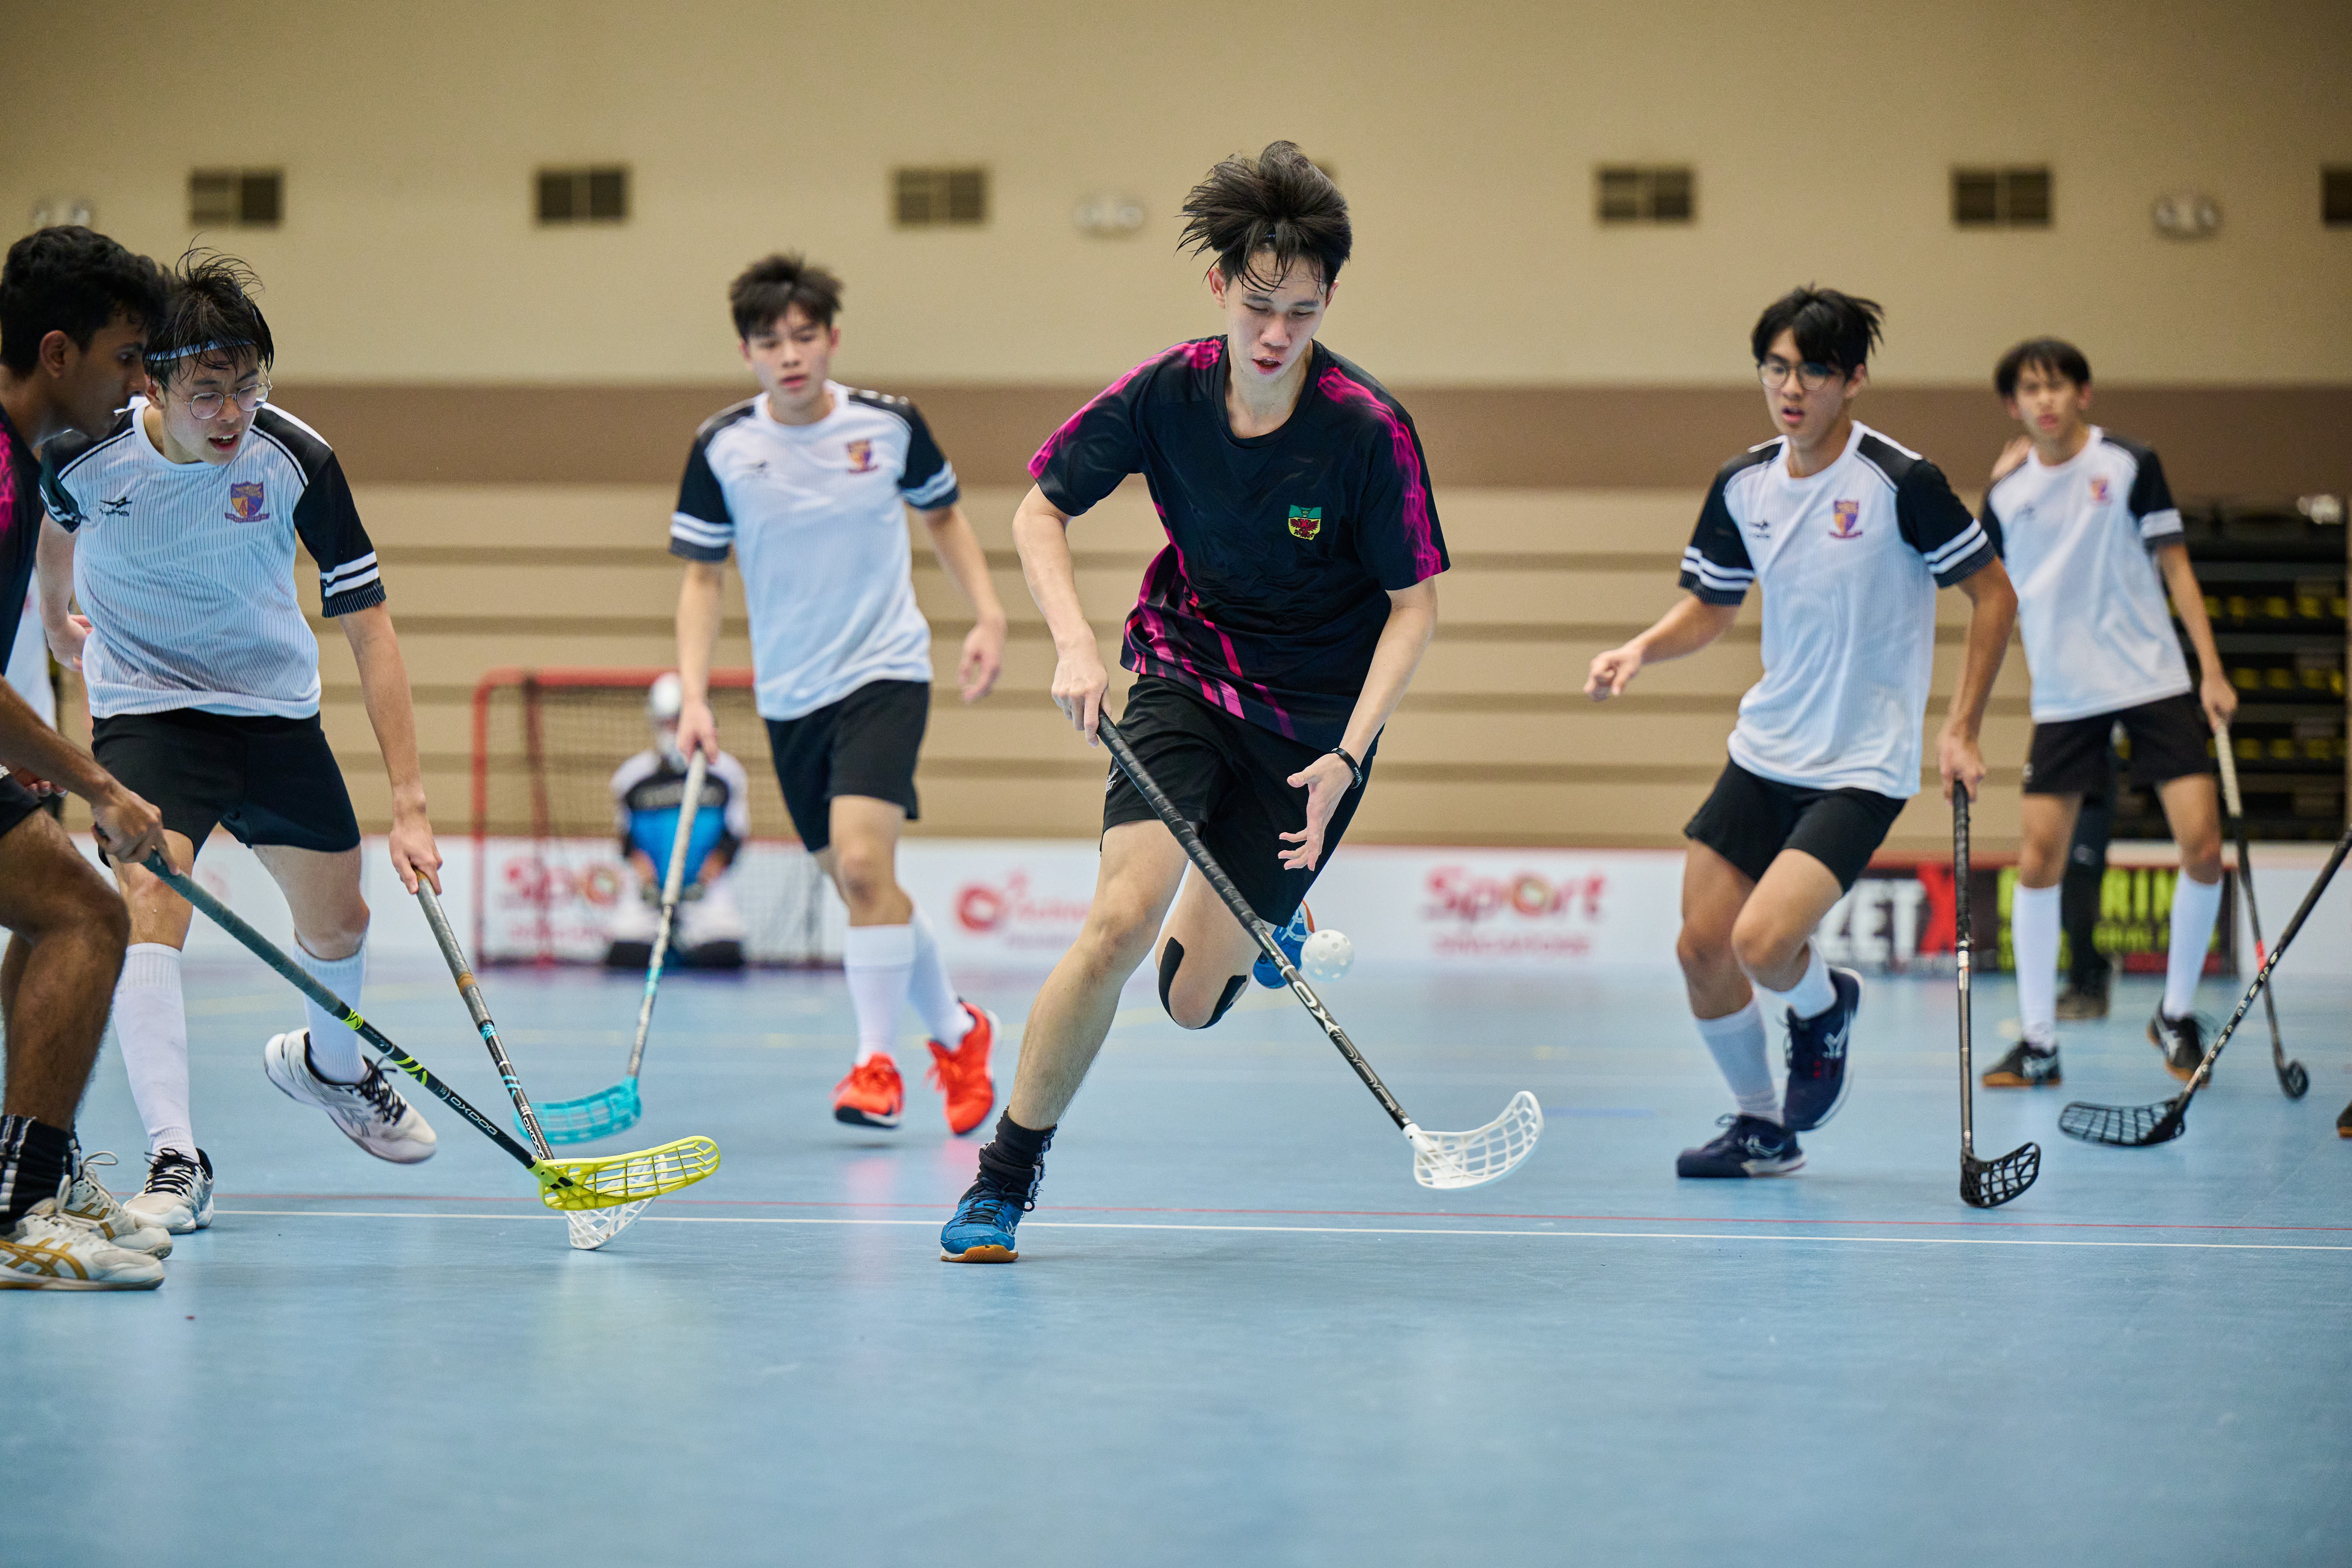 20220519_20220519 SSSC Floorball National A Div Boys Semi Finals Raffles Junior College Vs Anglo-Chinese Junior College_Siaw Woon Chong_0031